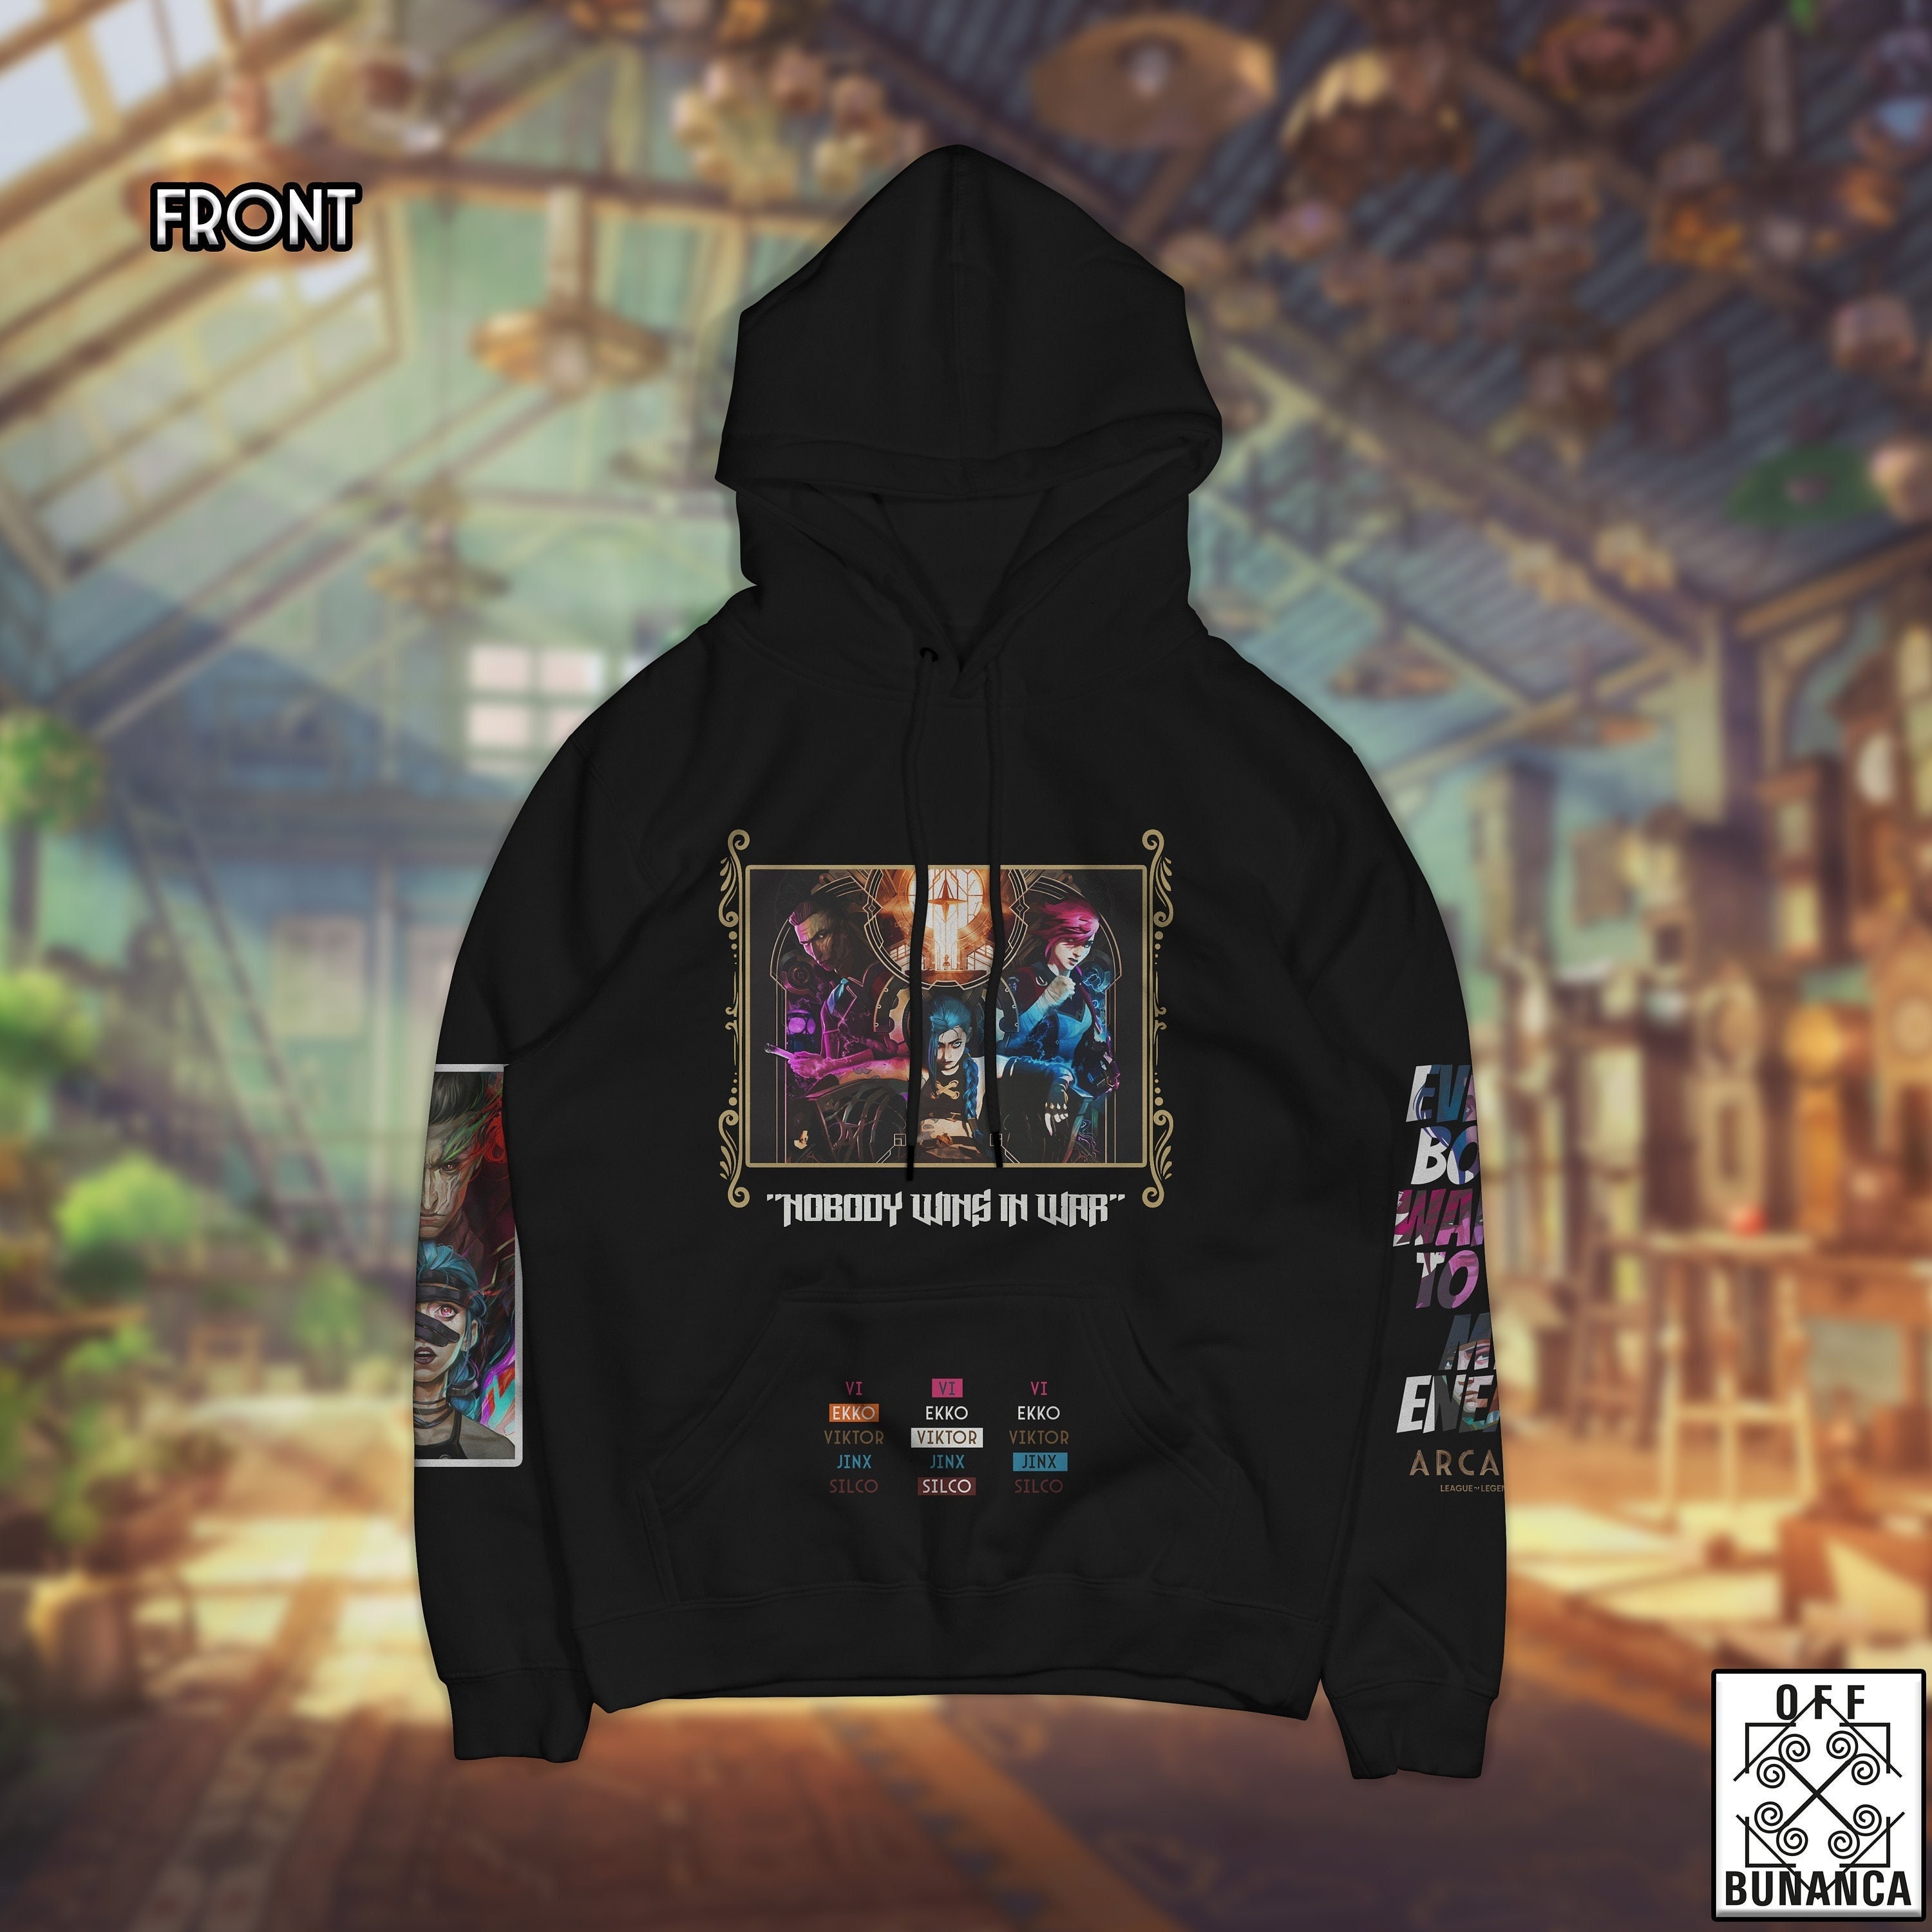 New League of Legends arcane LOL Hoodie sweater 3D printing fashion long  sleeve sweater (XL, 1)